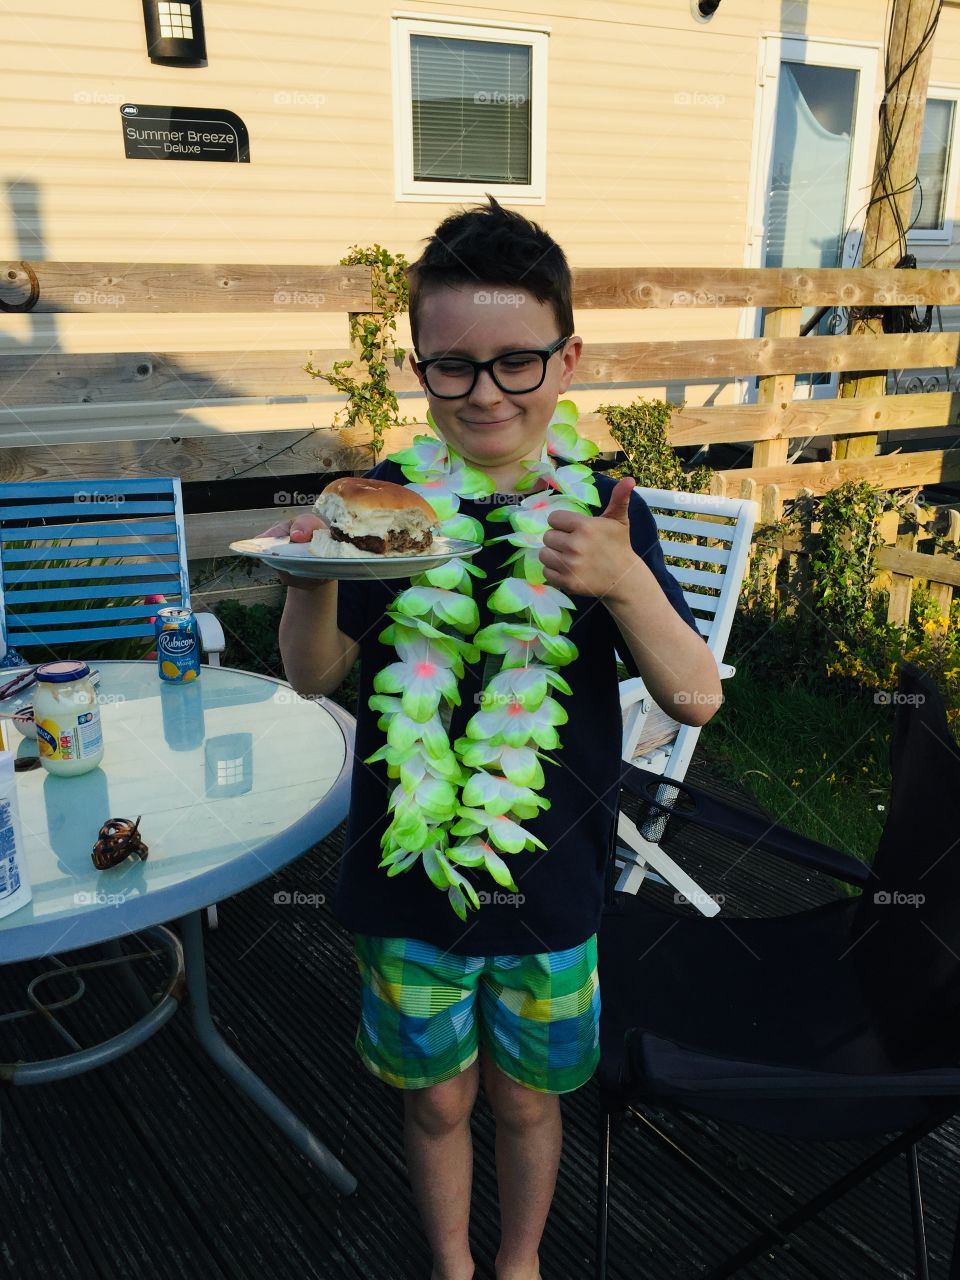 Boy at a barbecue